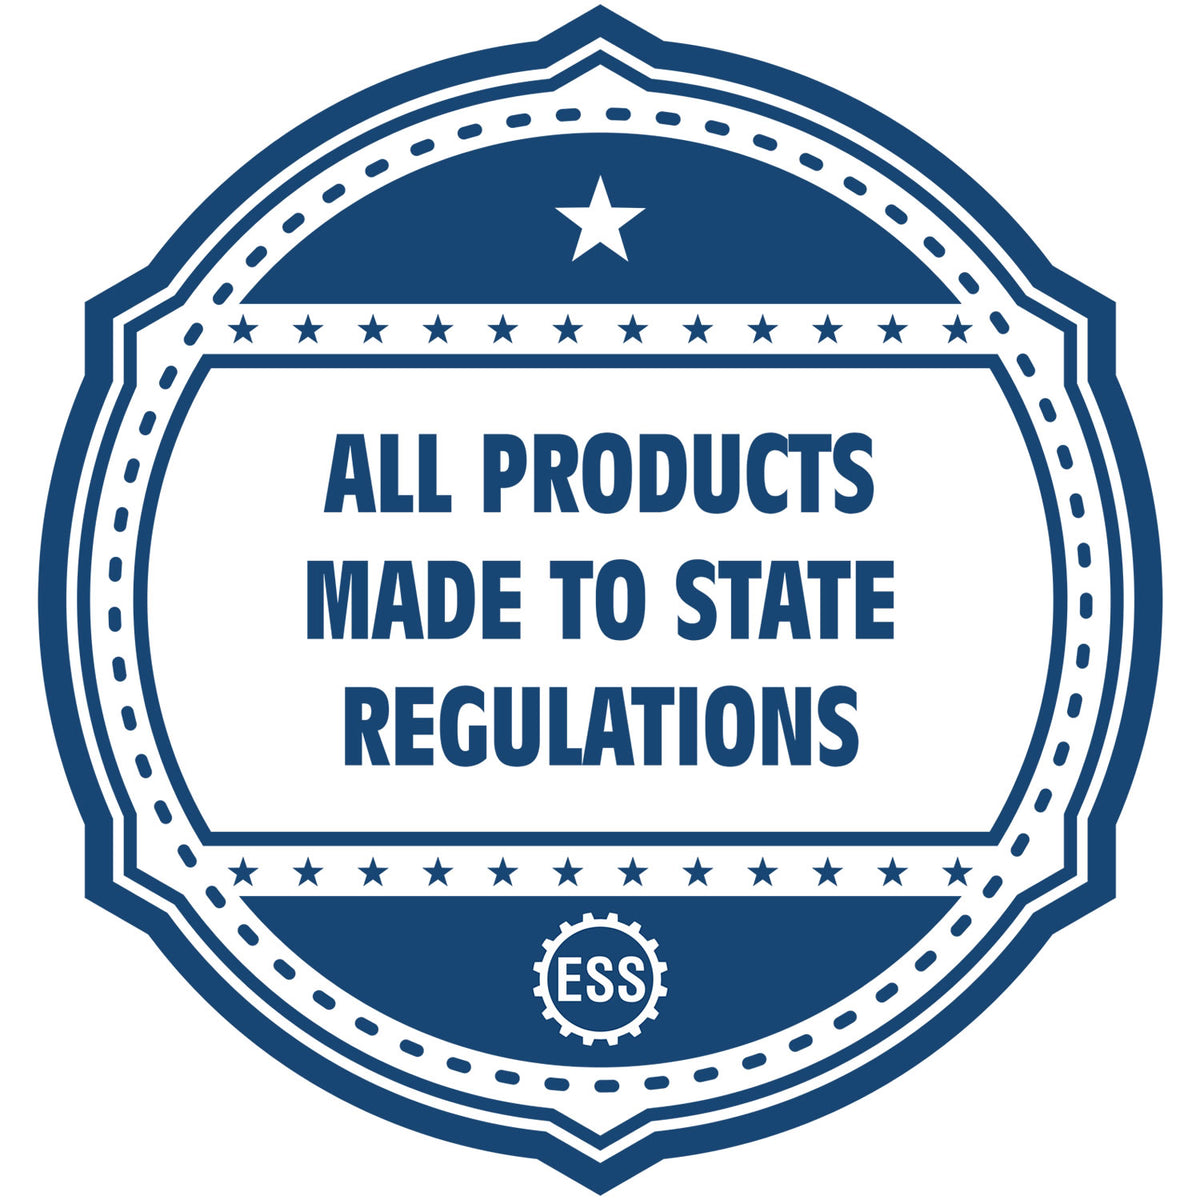 An icon or badge element for the Slim Pre-Inked Wyoming Landscape Architect Seal Stamp showing that this product is made in compliance with state regulations.